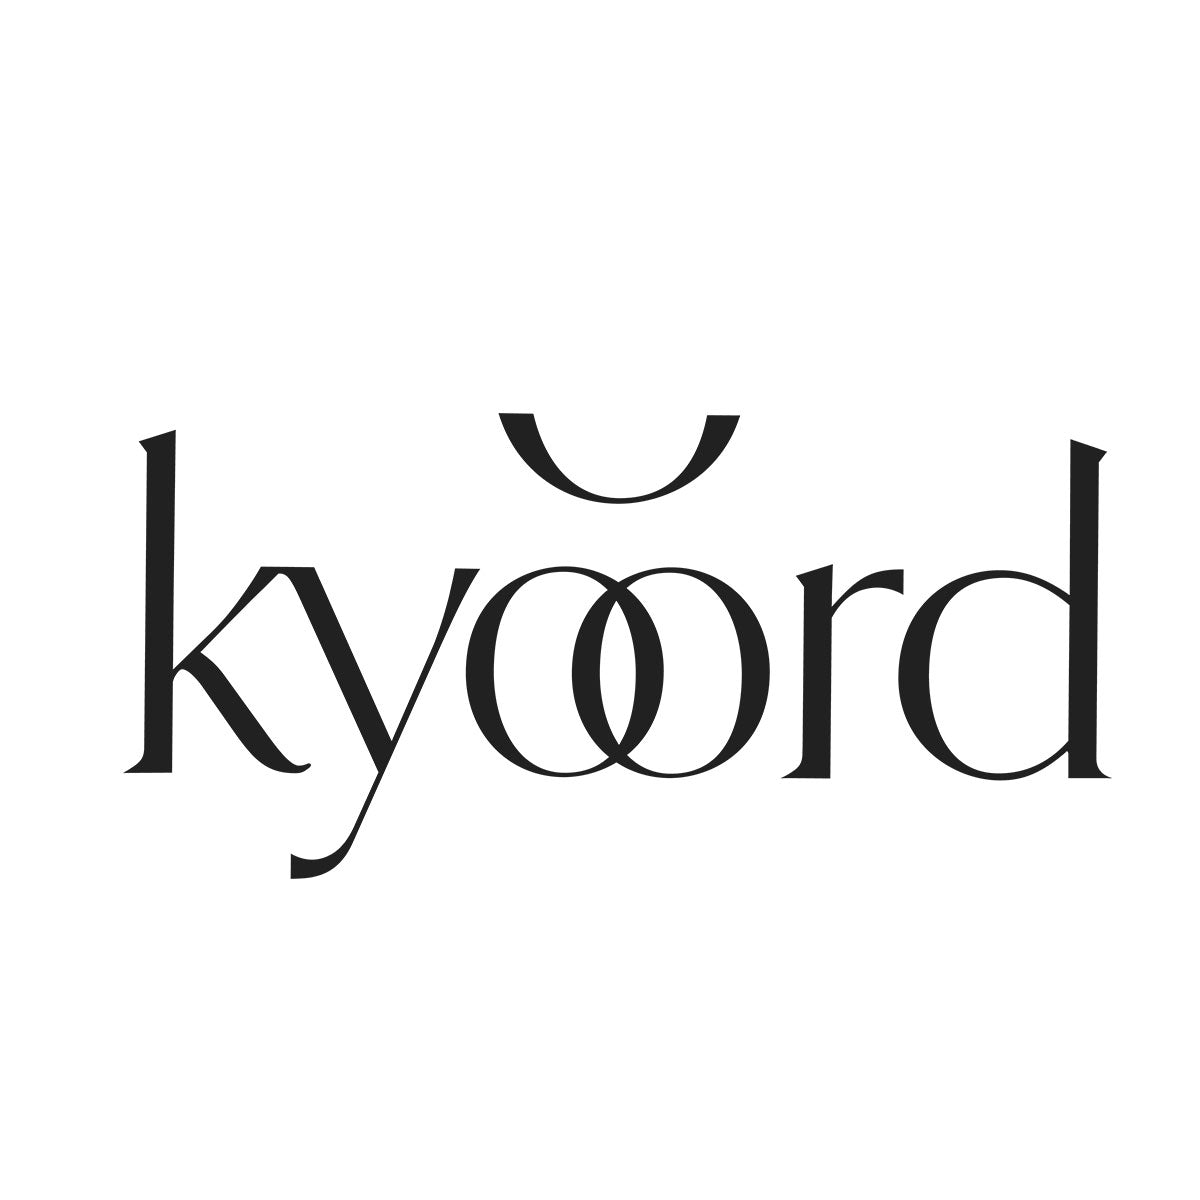 Kyoord